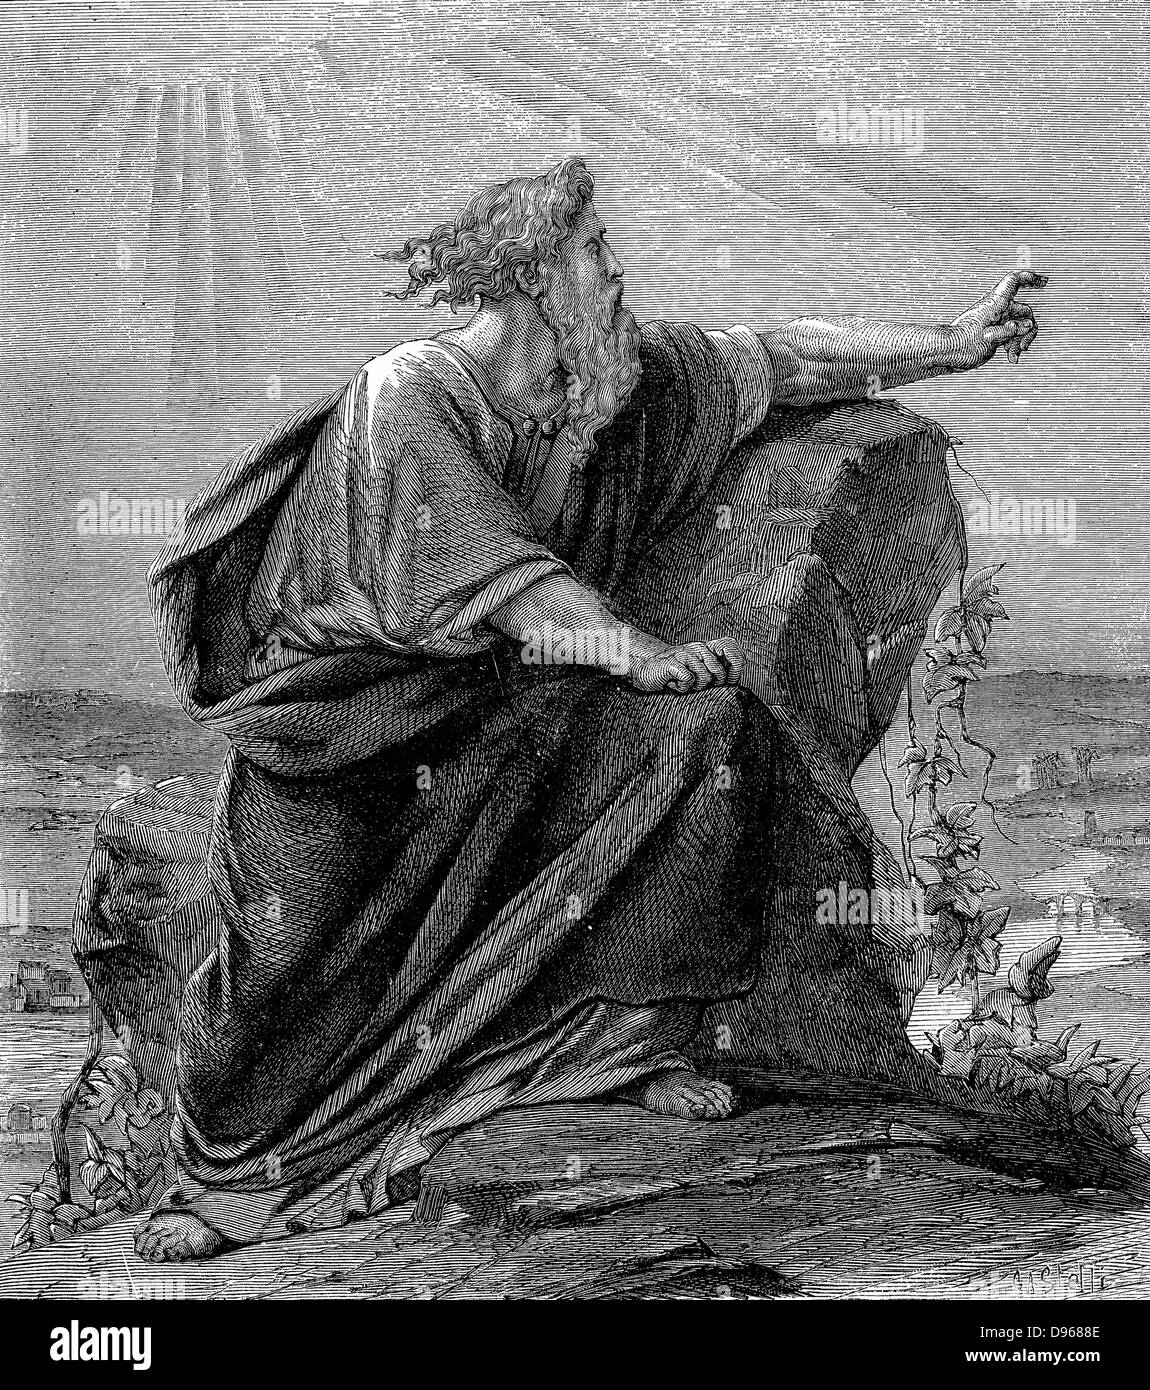 Moses, Old Testament prophet, having led his people out of captivity and through the wilderness, views the Promised Land on which he will never set foot. 'Bible' Deuteronomy 34. Wood engraving c1860 Stock Photo